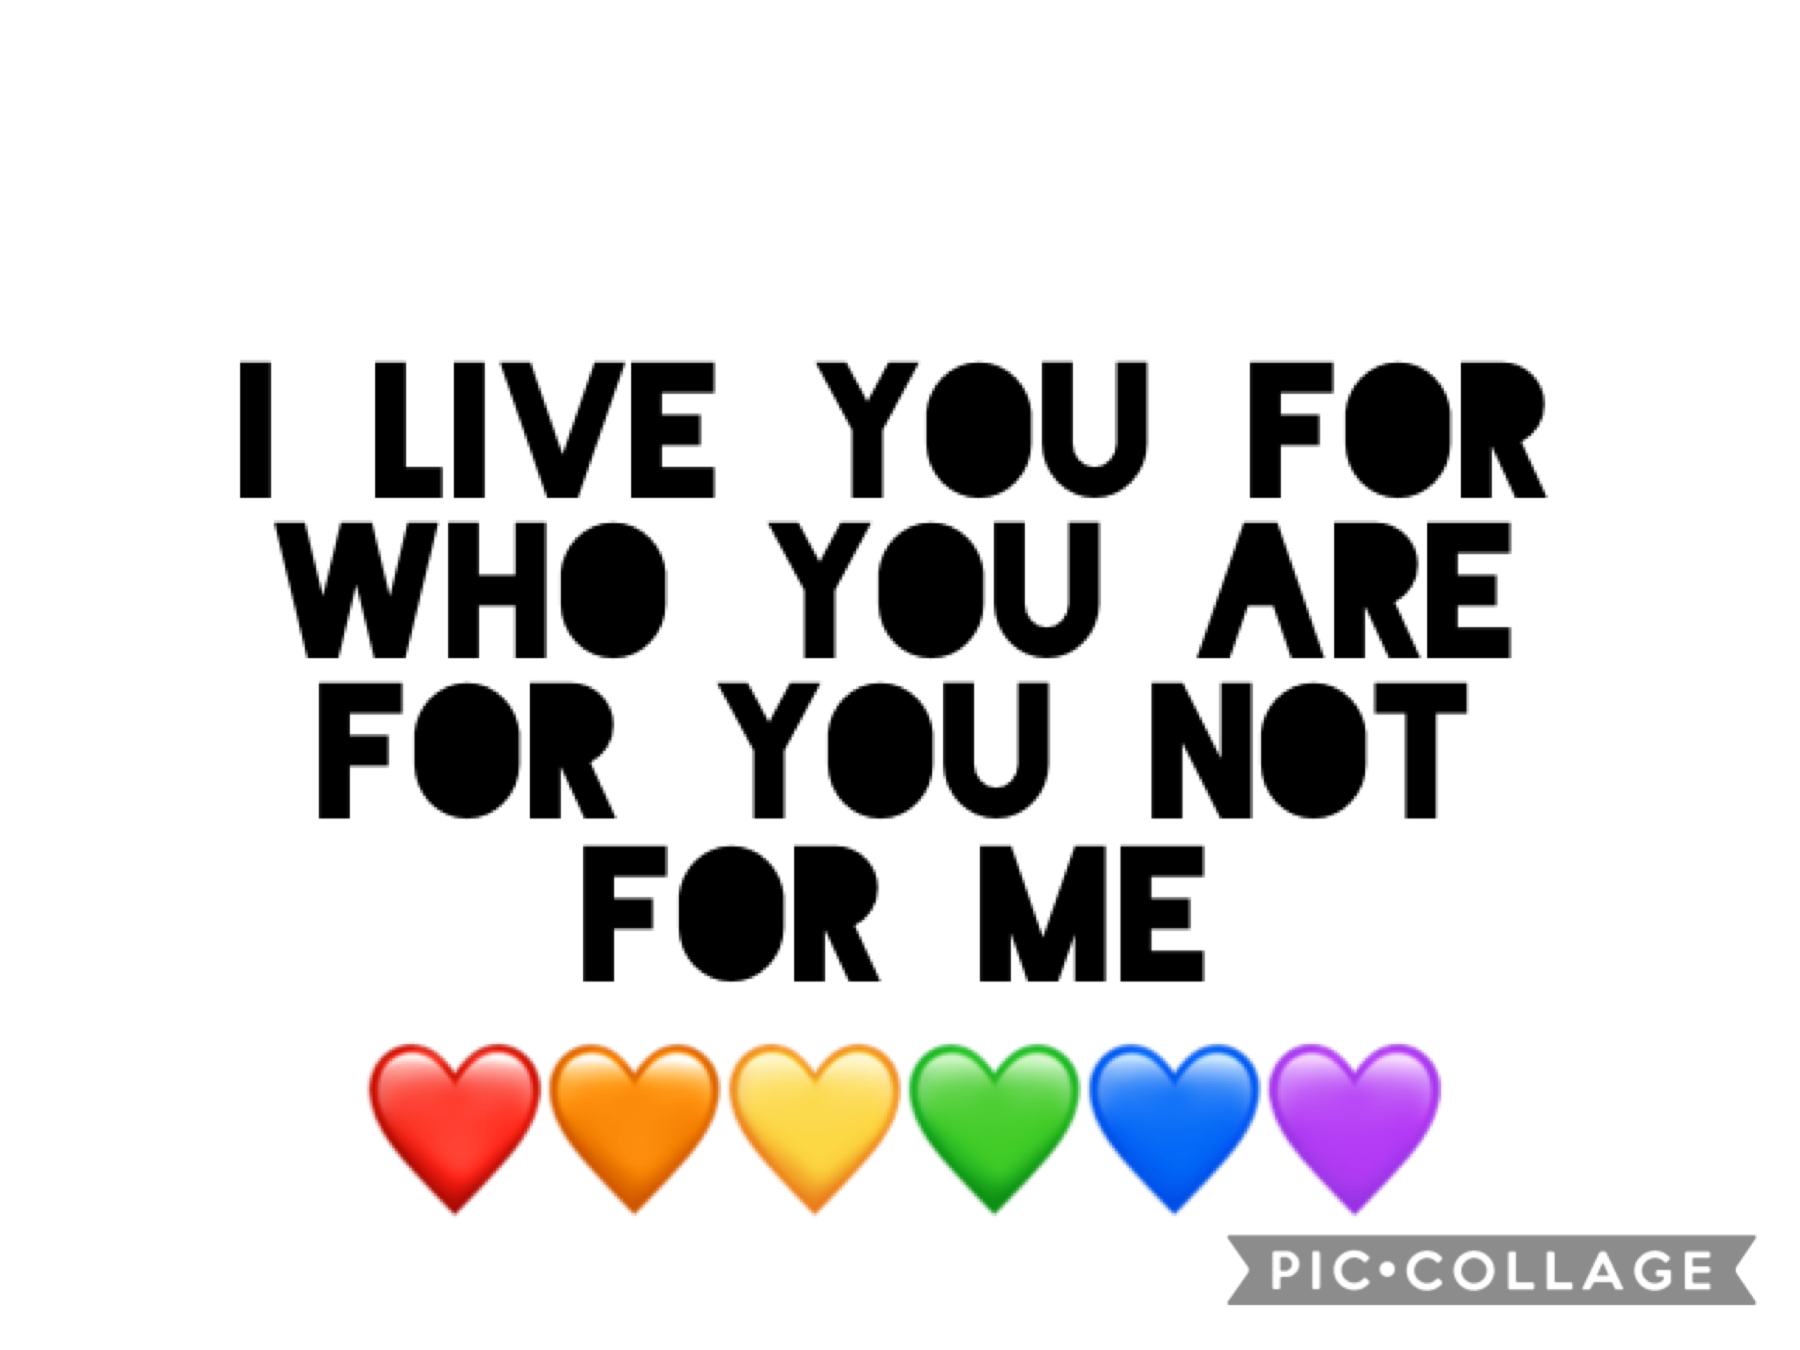 Love you for who you are where you come for and most importantly for who you want to be 

❤️🧡💛💚💙💜 